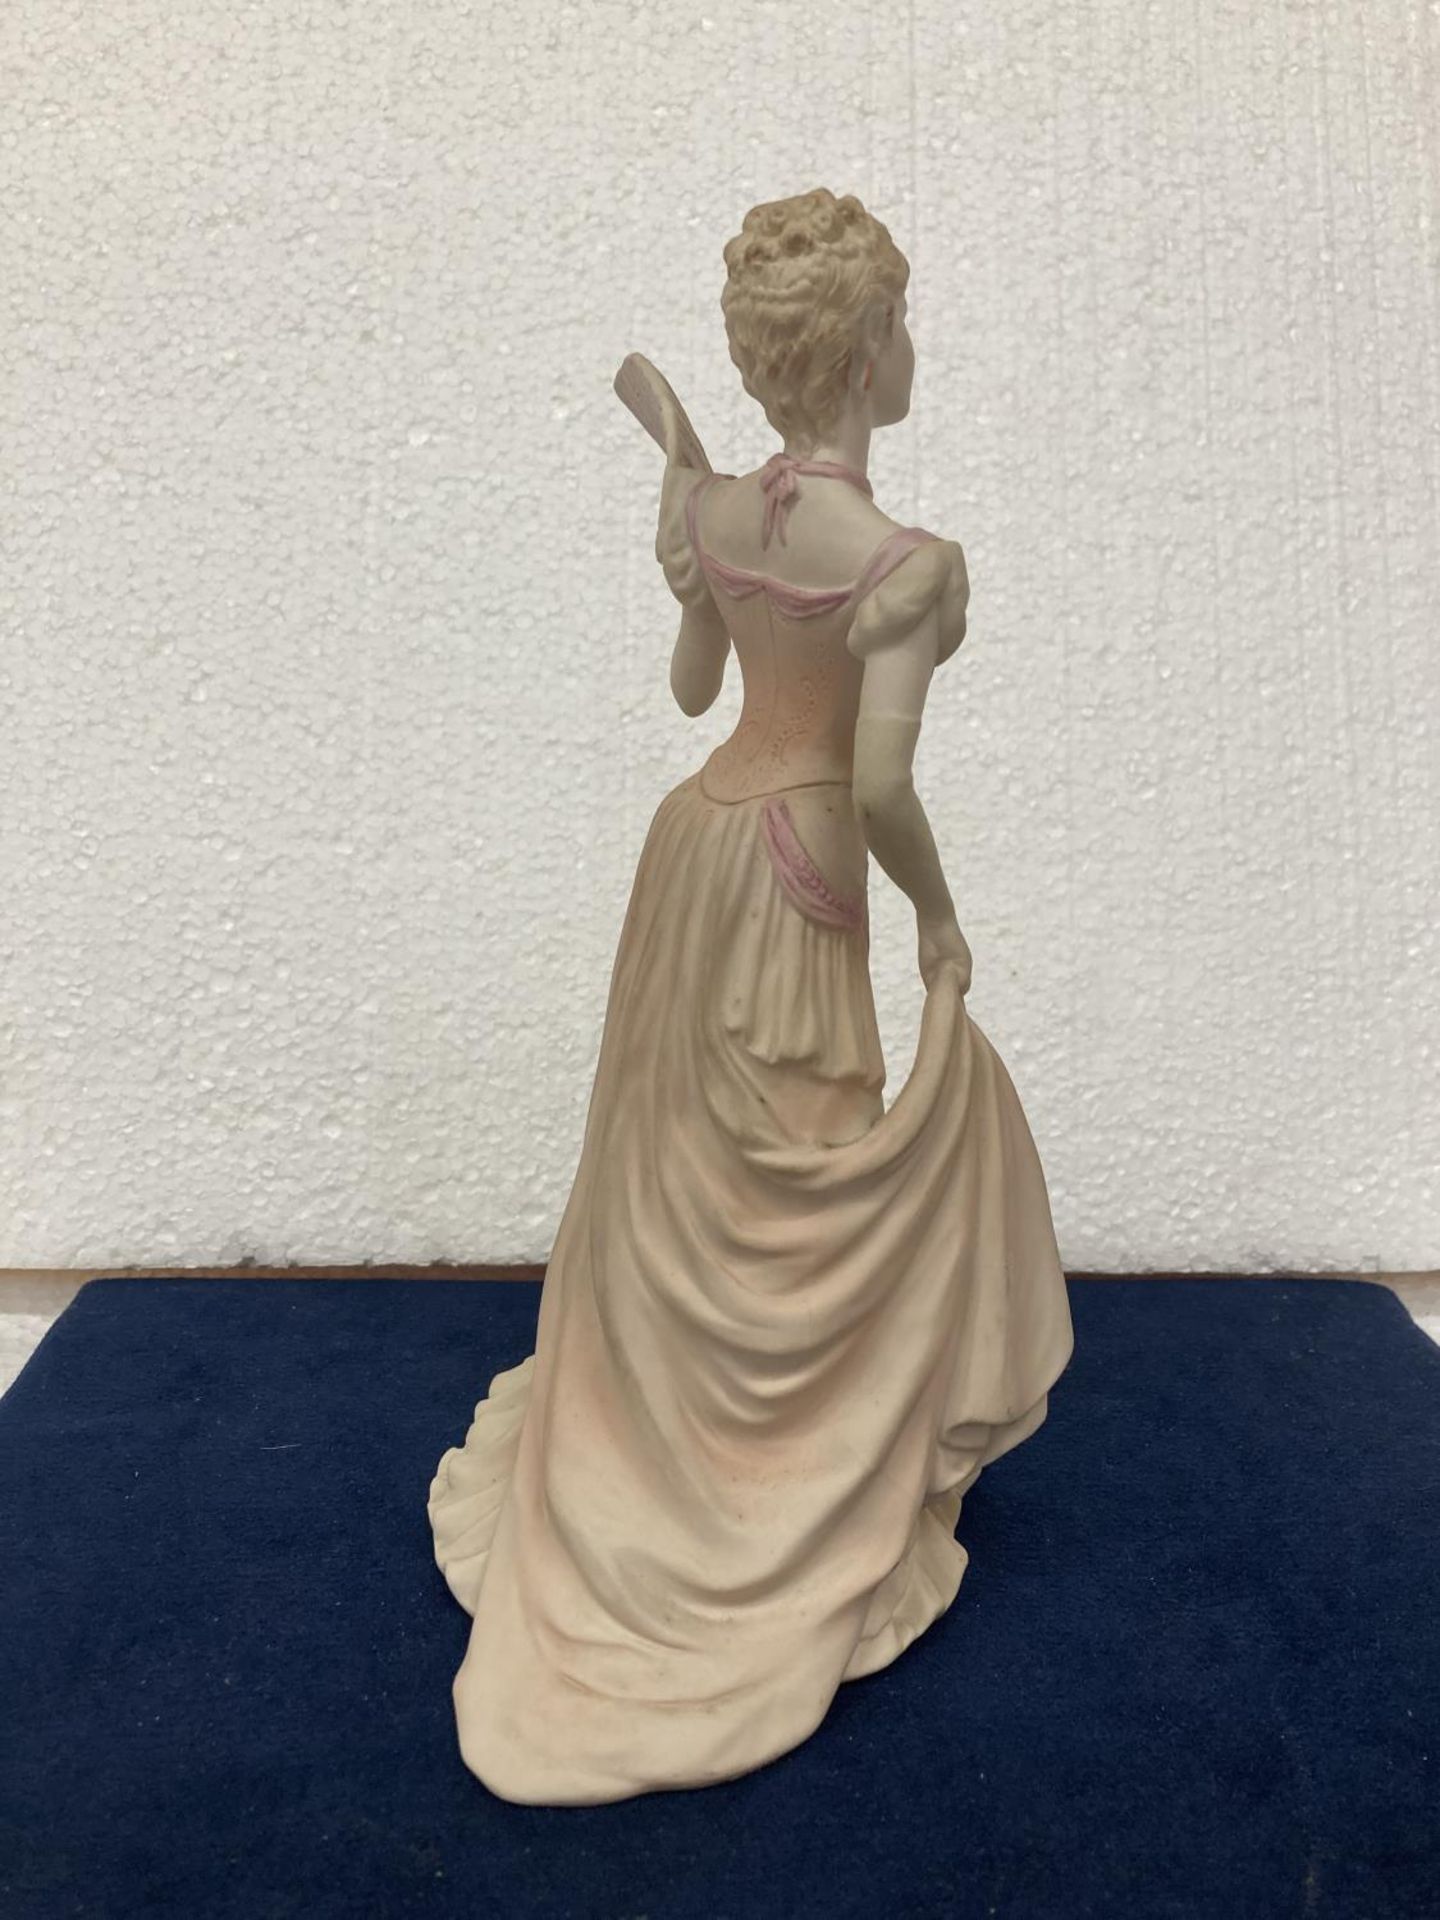 A COALPORT PORCELAIN FIGURINE FROM THE AGE OF ELEGANCE COLLECTION "EVENING AT THE OPERA" HAND - Image 4 of 8